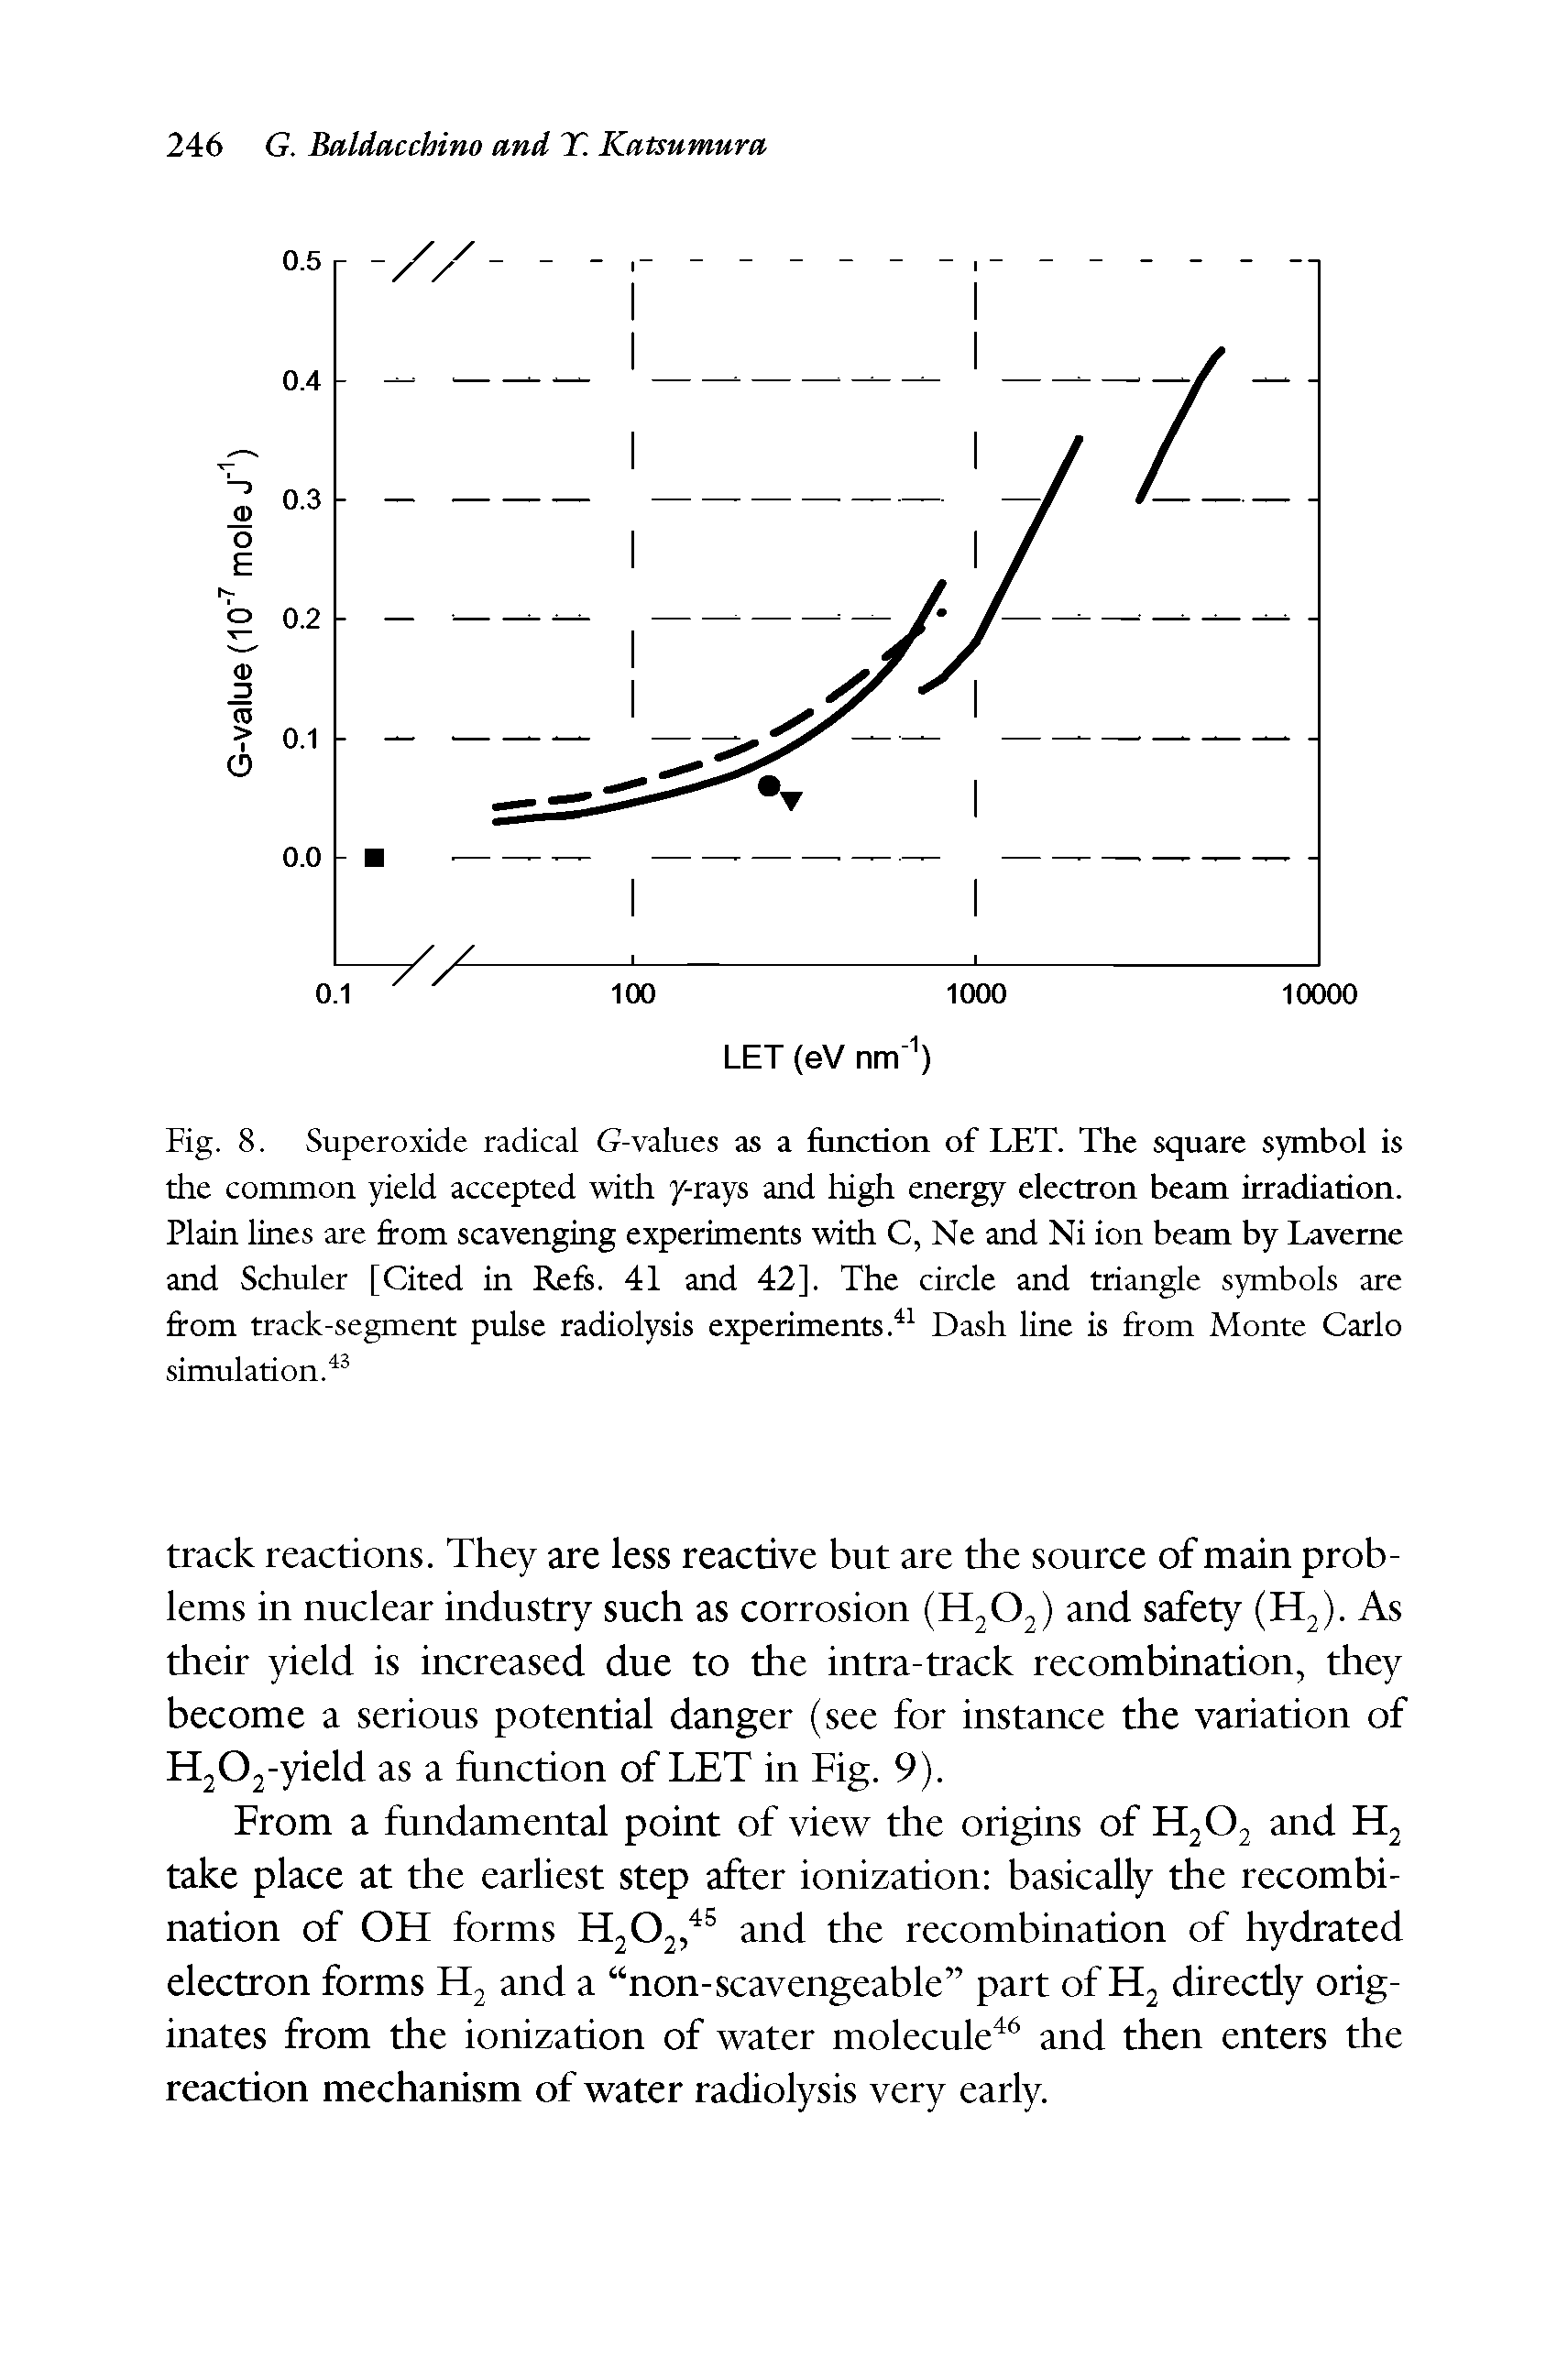 Fig. 8. Superoxide radical G-values as a function of LET. The square symbol is the common yield accepted with y-rays and high energy electton beam irradiation. Plain lines are from scavenging experiments with C, Ne and Ni ion beam by Laverne and Schuler [Cited in Refs. 41 and 42]. The circle and triangle symbols are from track-segment pulse radiolysis experiments. Dash line is from Monte Carlo simulation.